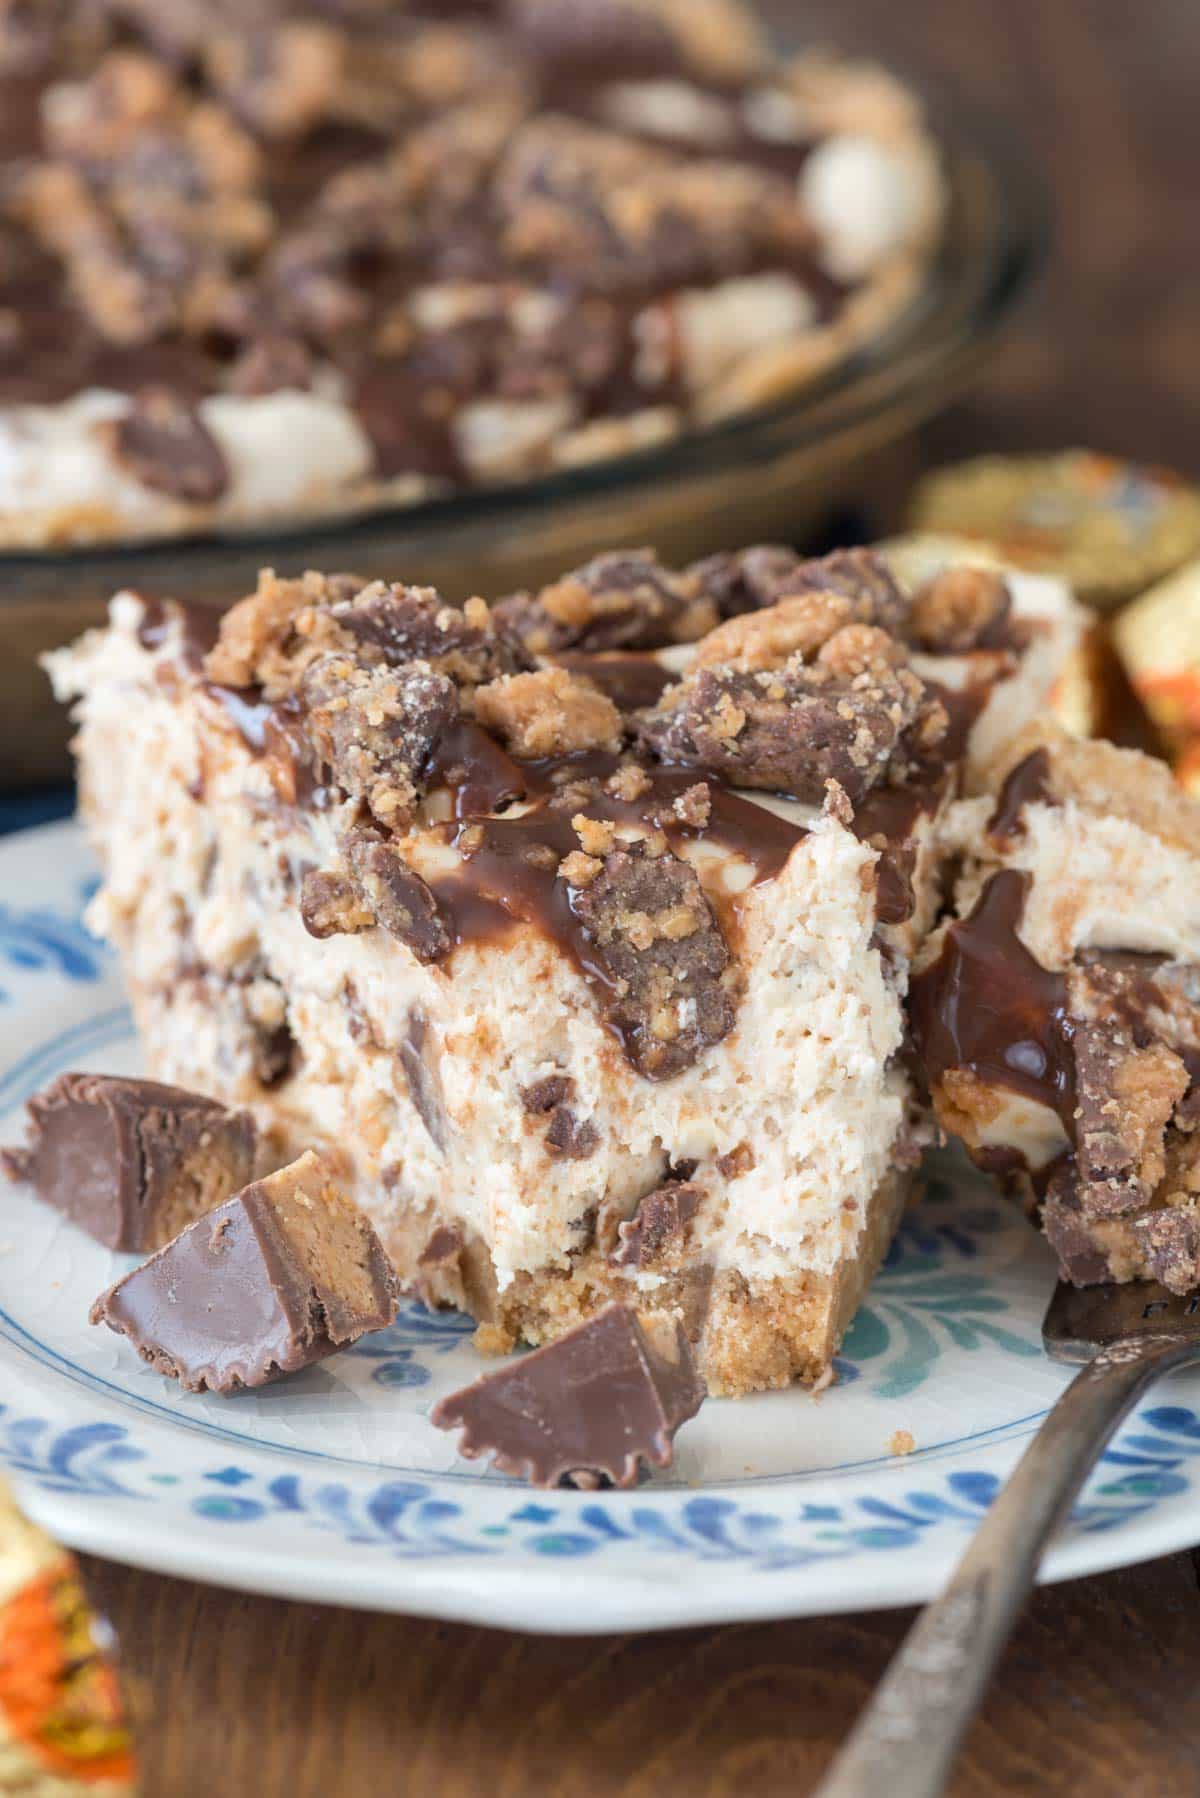 No Bake Peanut Butter Cup Pie - Crazy for Crust